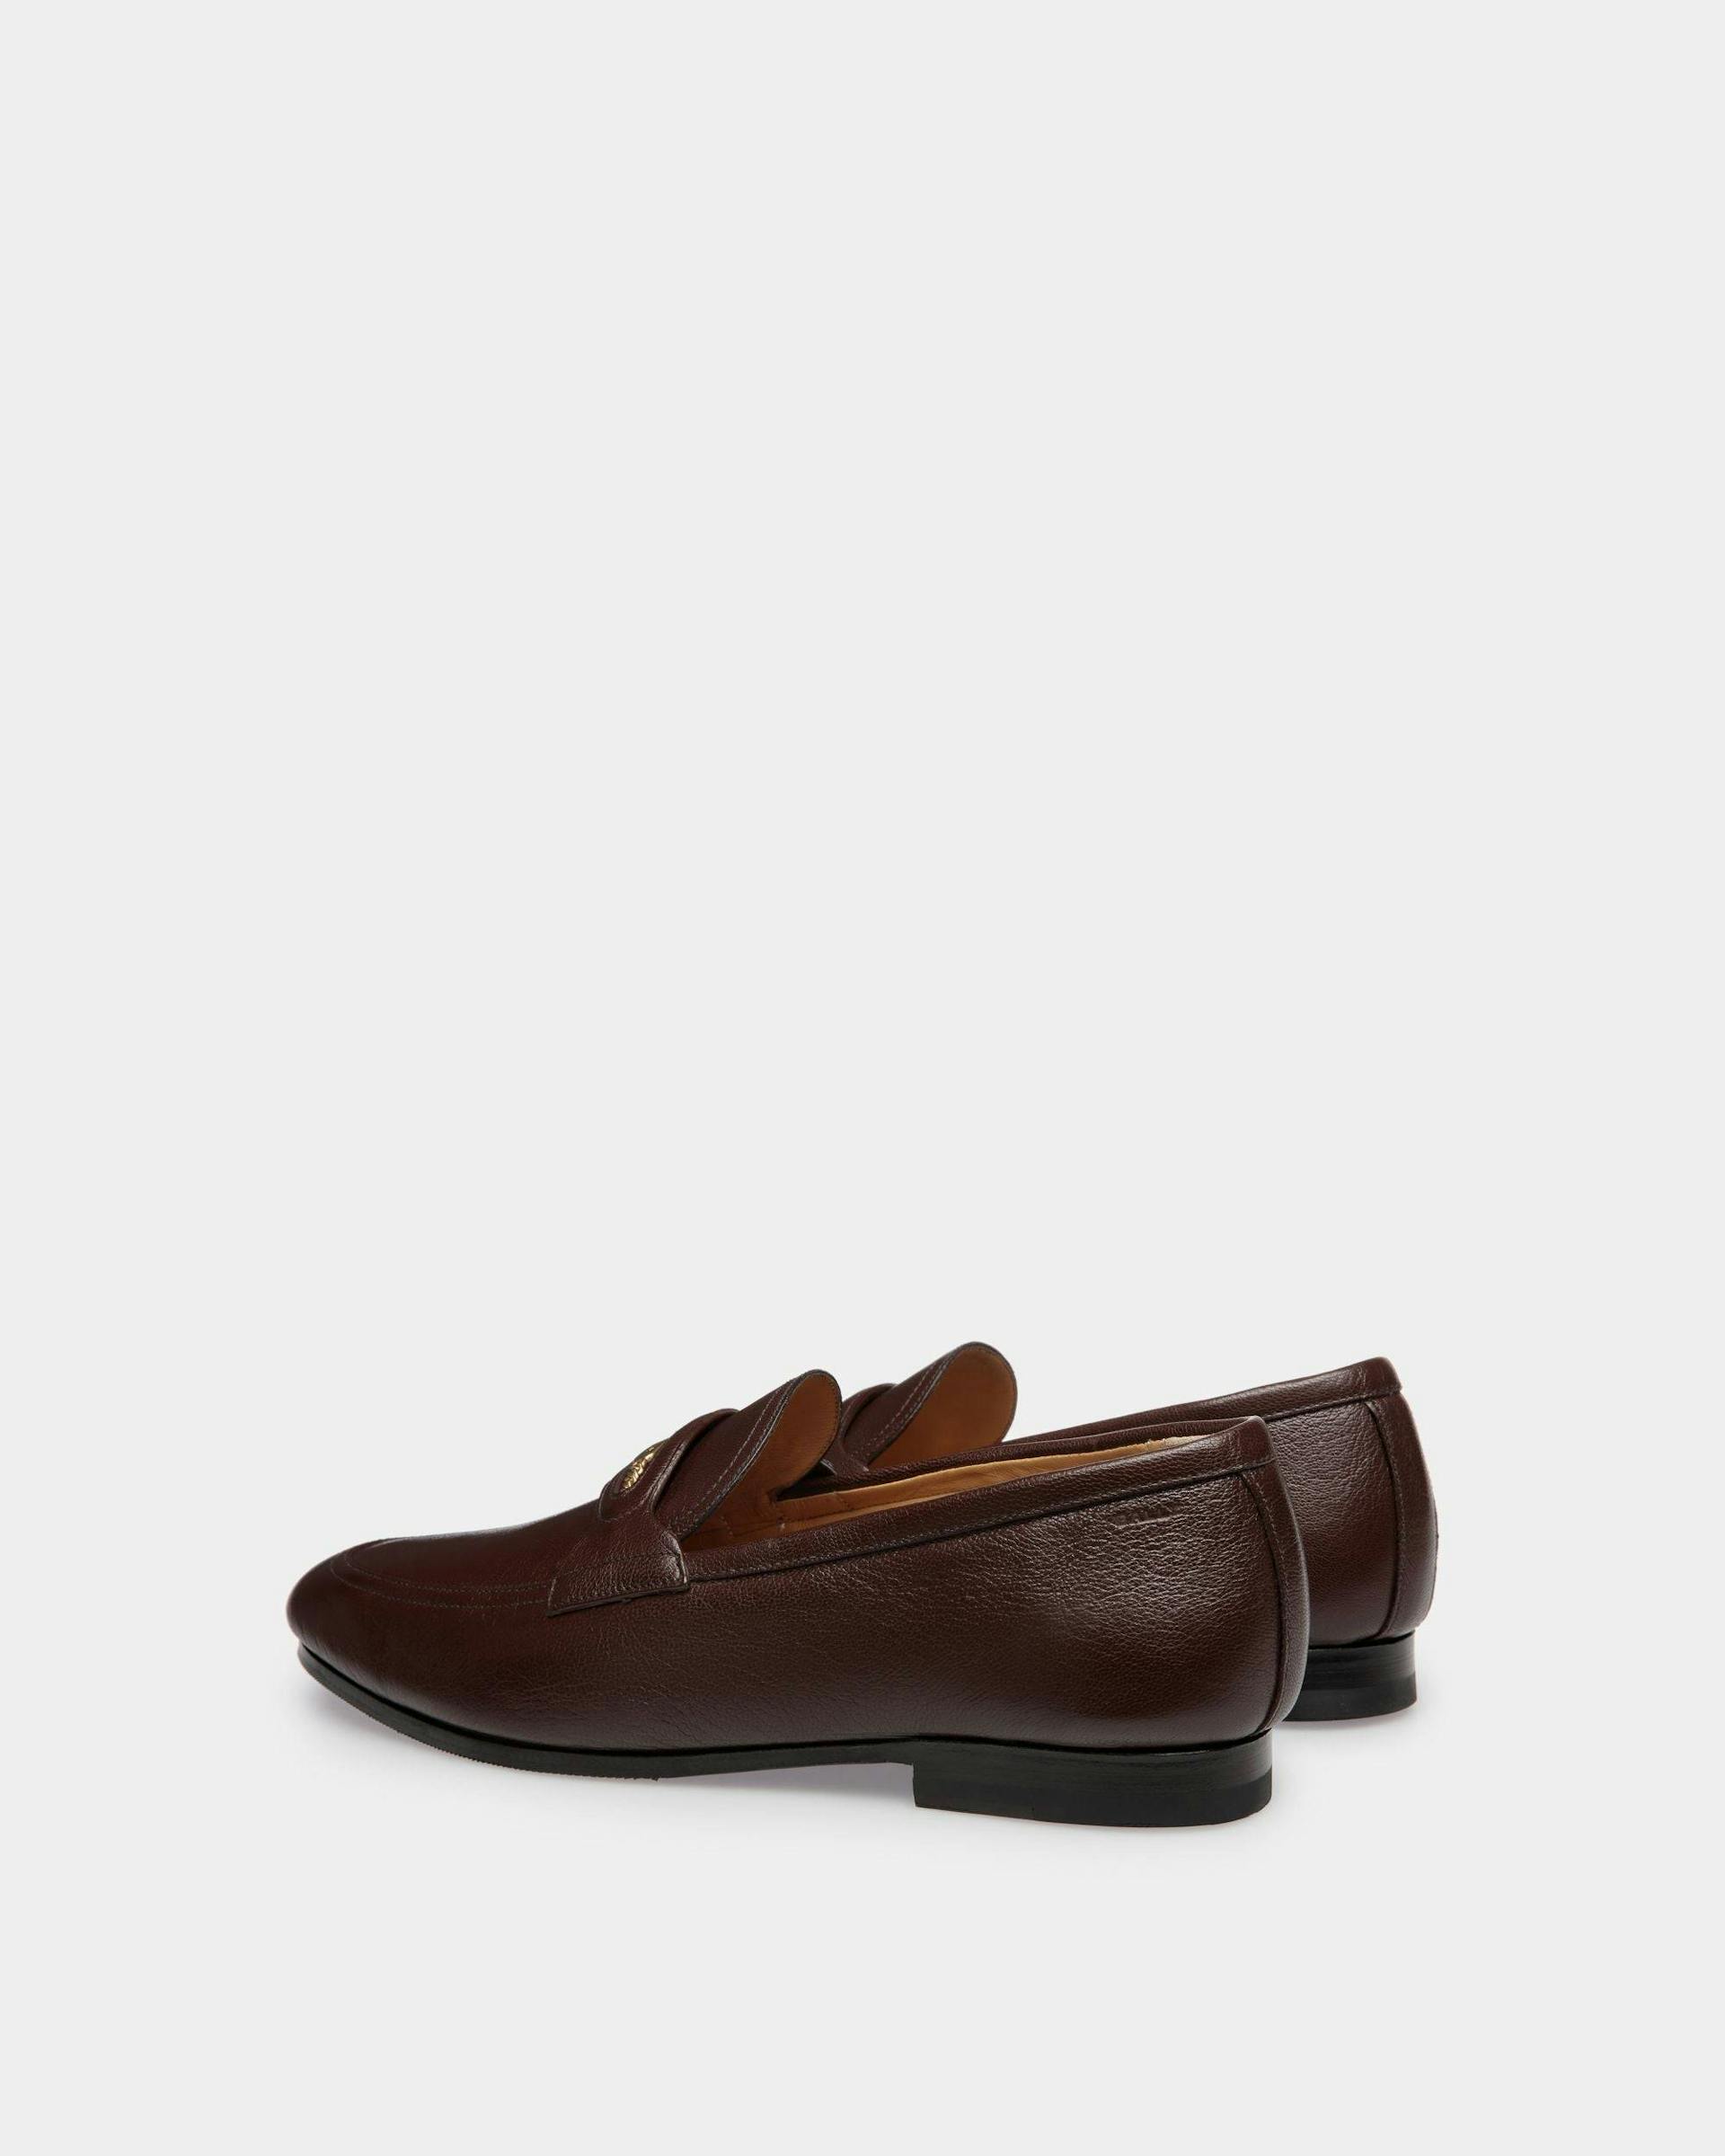 Men's Plume Loafer in Brown Grained Leather | Bally | Still Life 3/4 Front